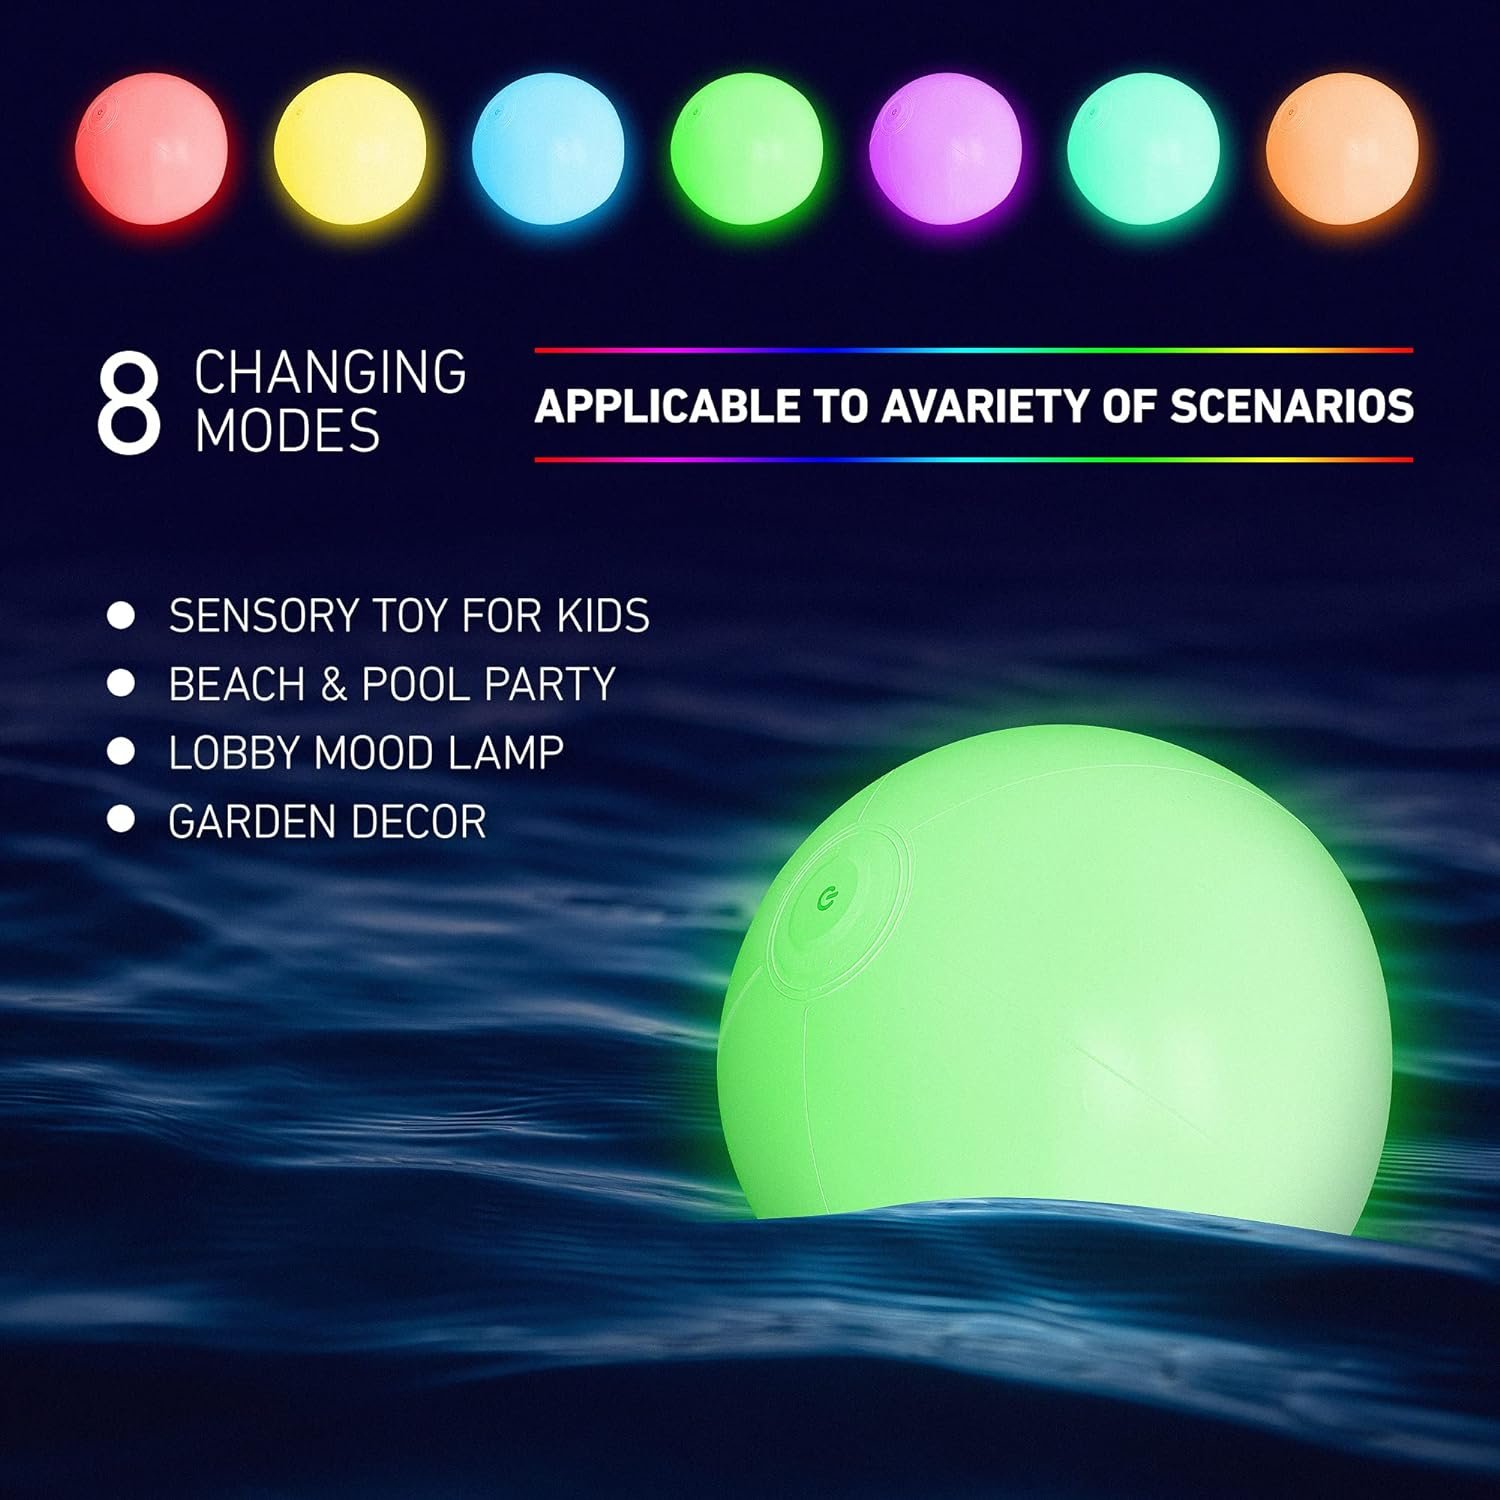 Pool Toys - 4 PACK Light Up Beach Balls for Kids w/ 8 Light Modes, Pool Beach Games Balls for Outdoor or Indoor Activities, Glow in The Dark Pool Beach Decorations for Kids and Adults